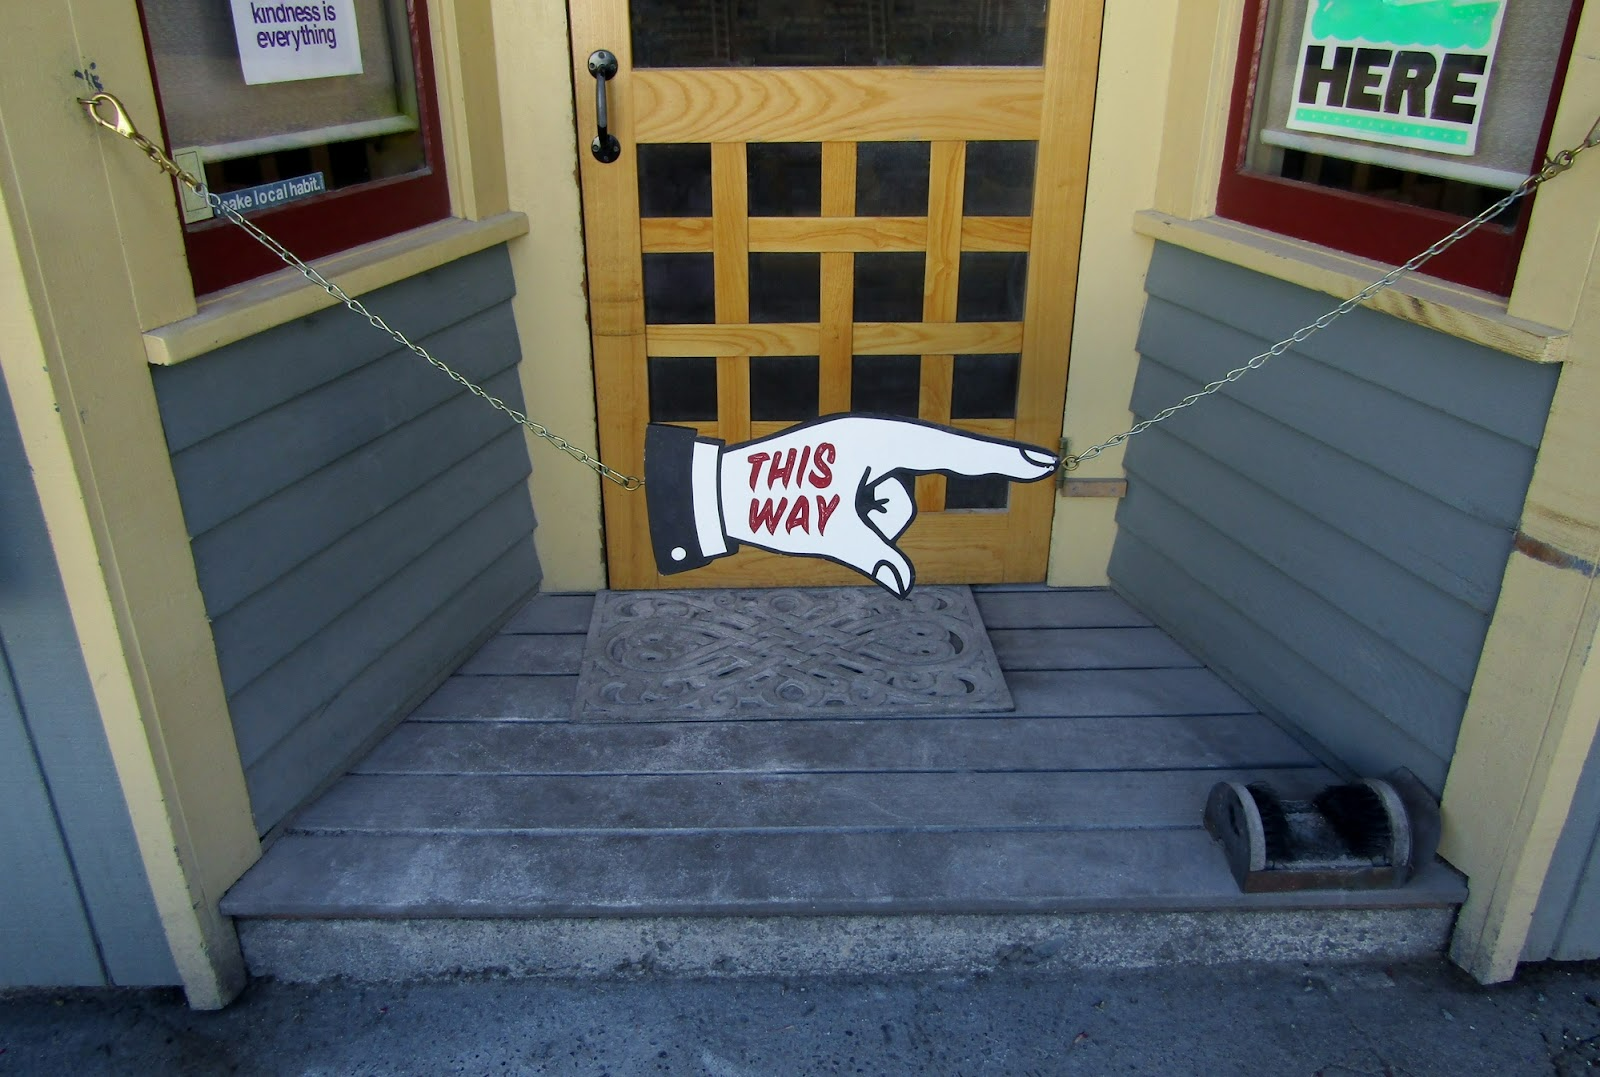  A “This Way” sign in the form of a hand pointing its finger blocks off a portion of a house.